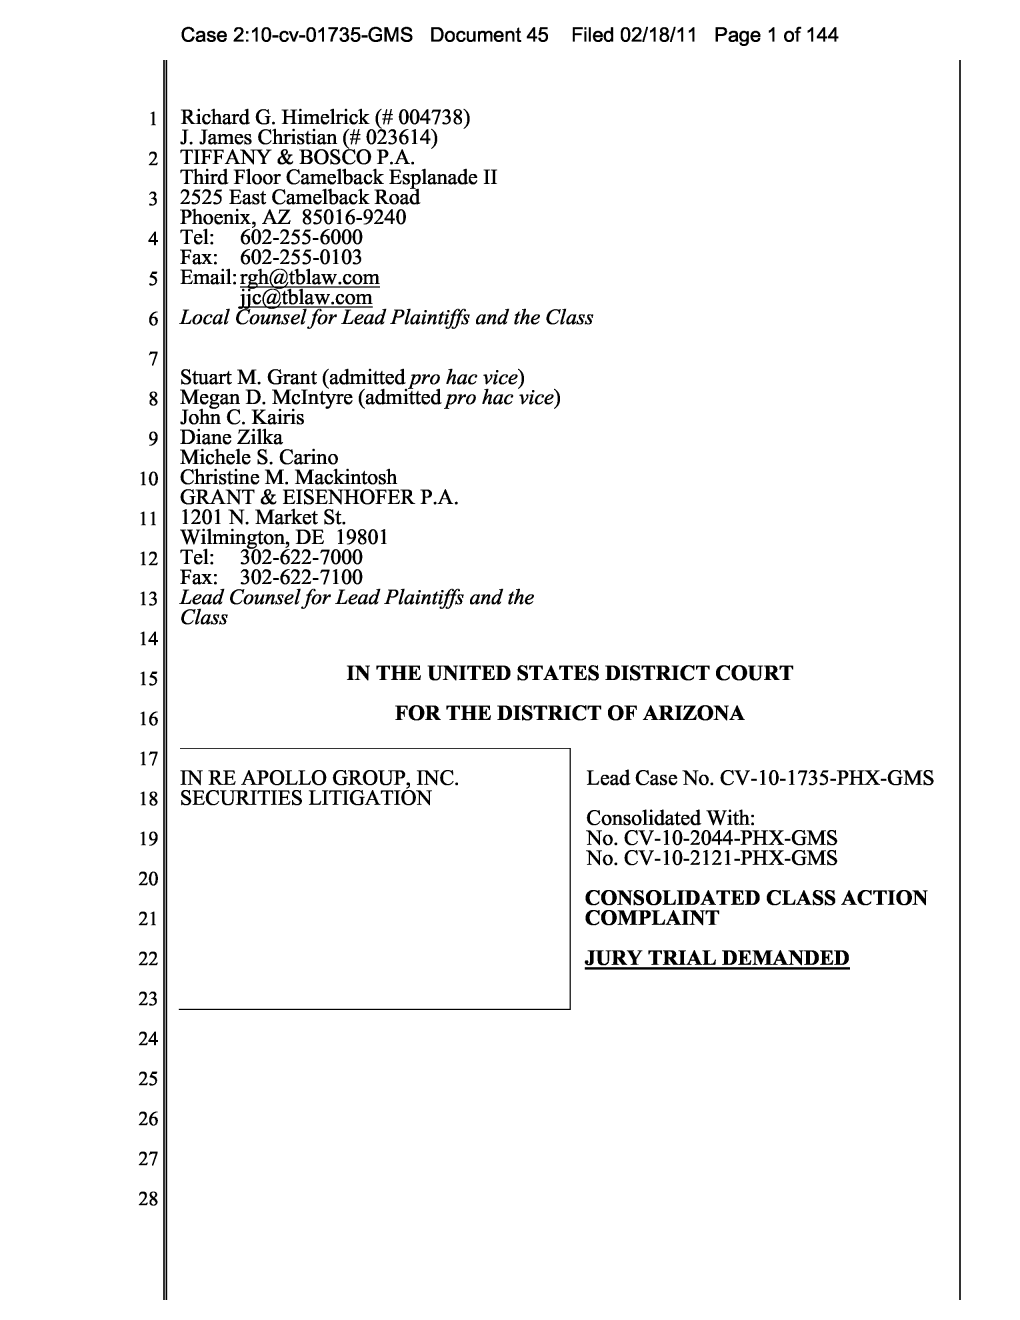 In Re Apollo Group, Inc. Securities Litigation 10-CV-01735-Consolidated Class Action Complaint